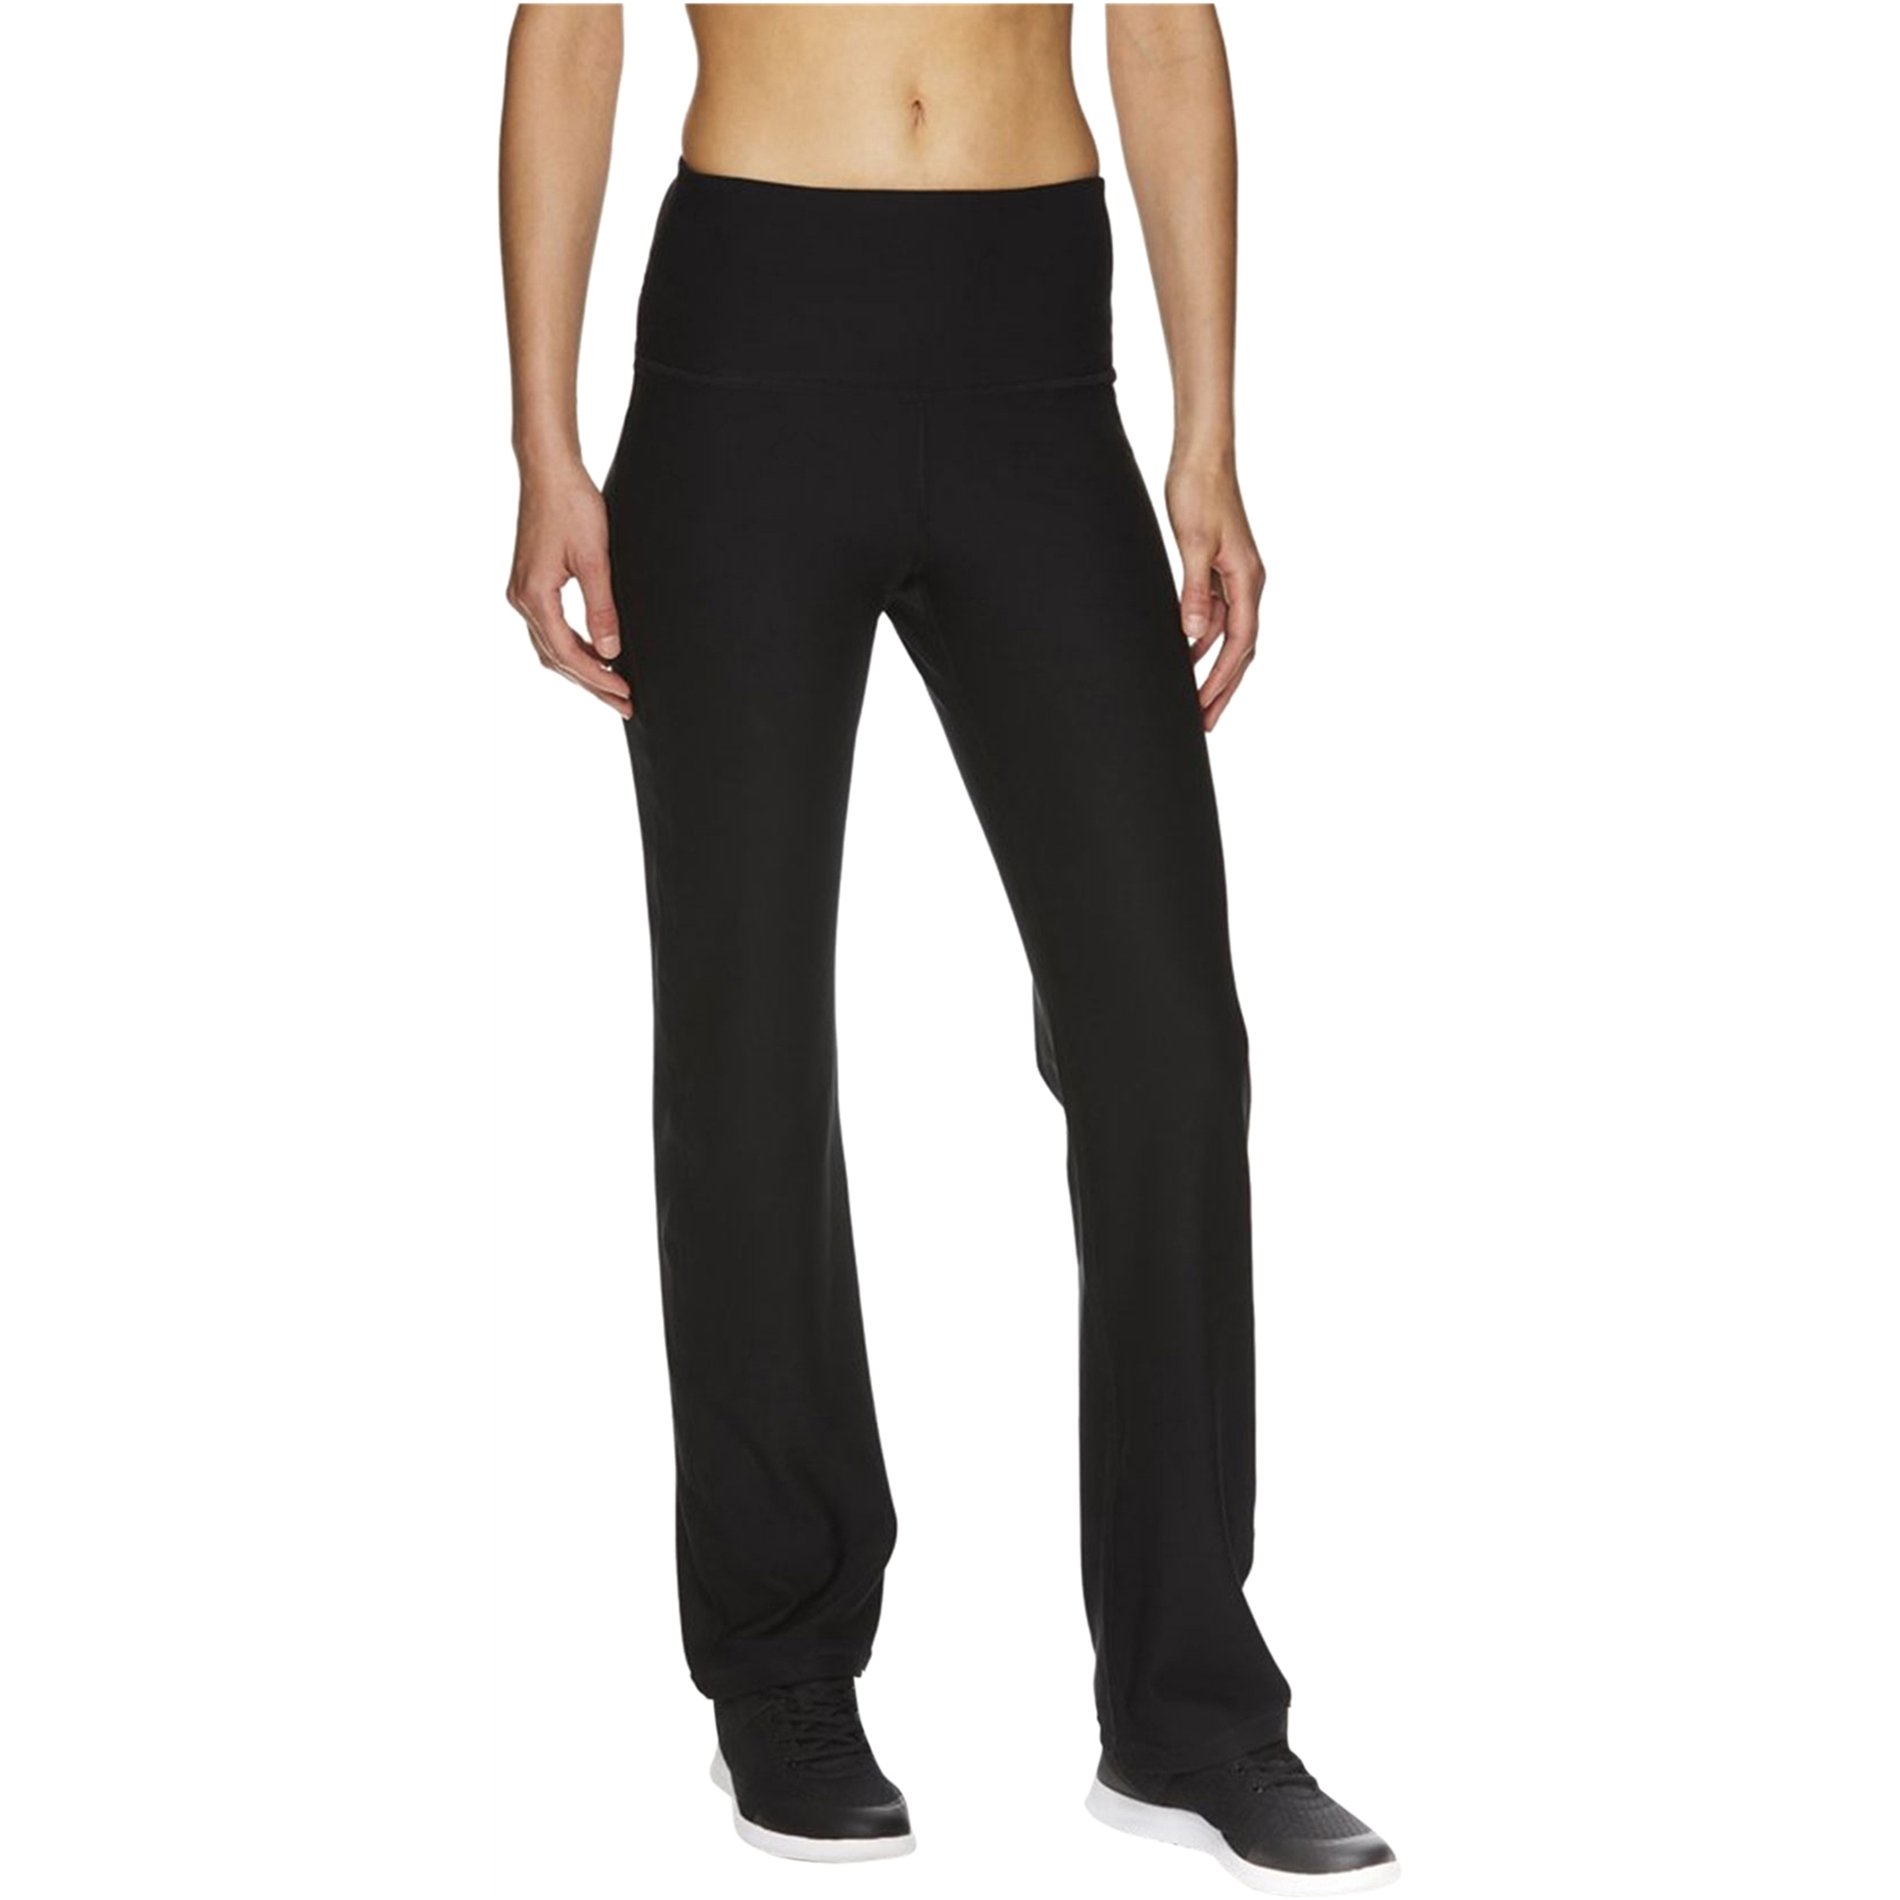 Reebok Womens Highrise Running Compression Athletic Pants